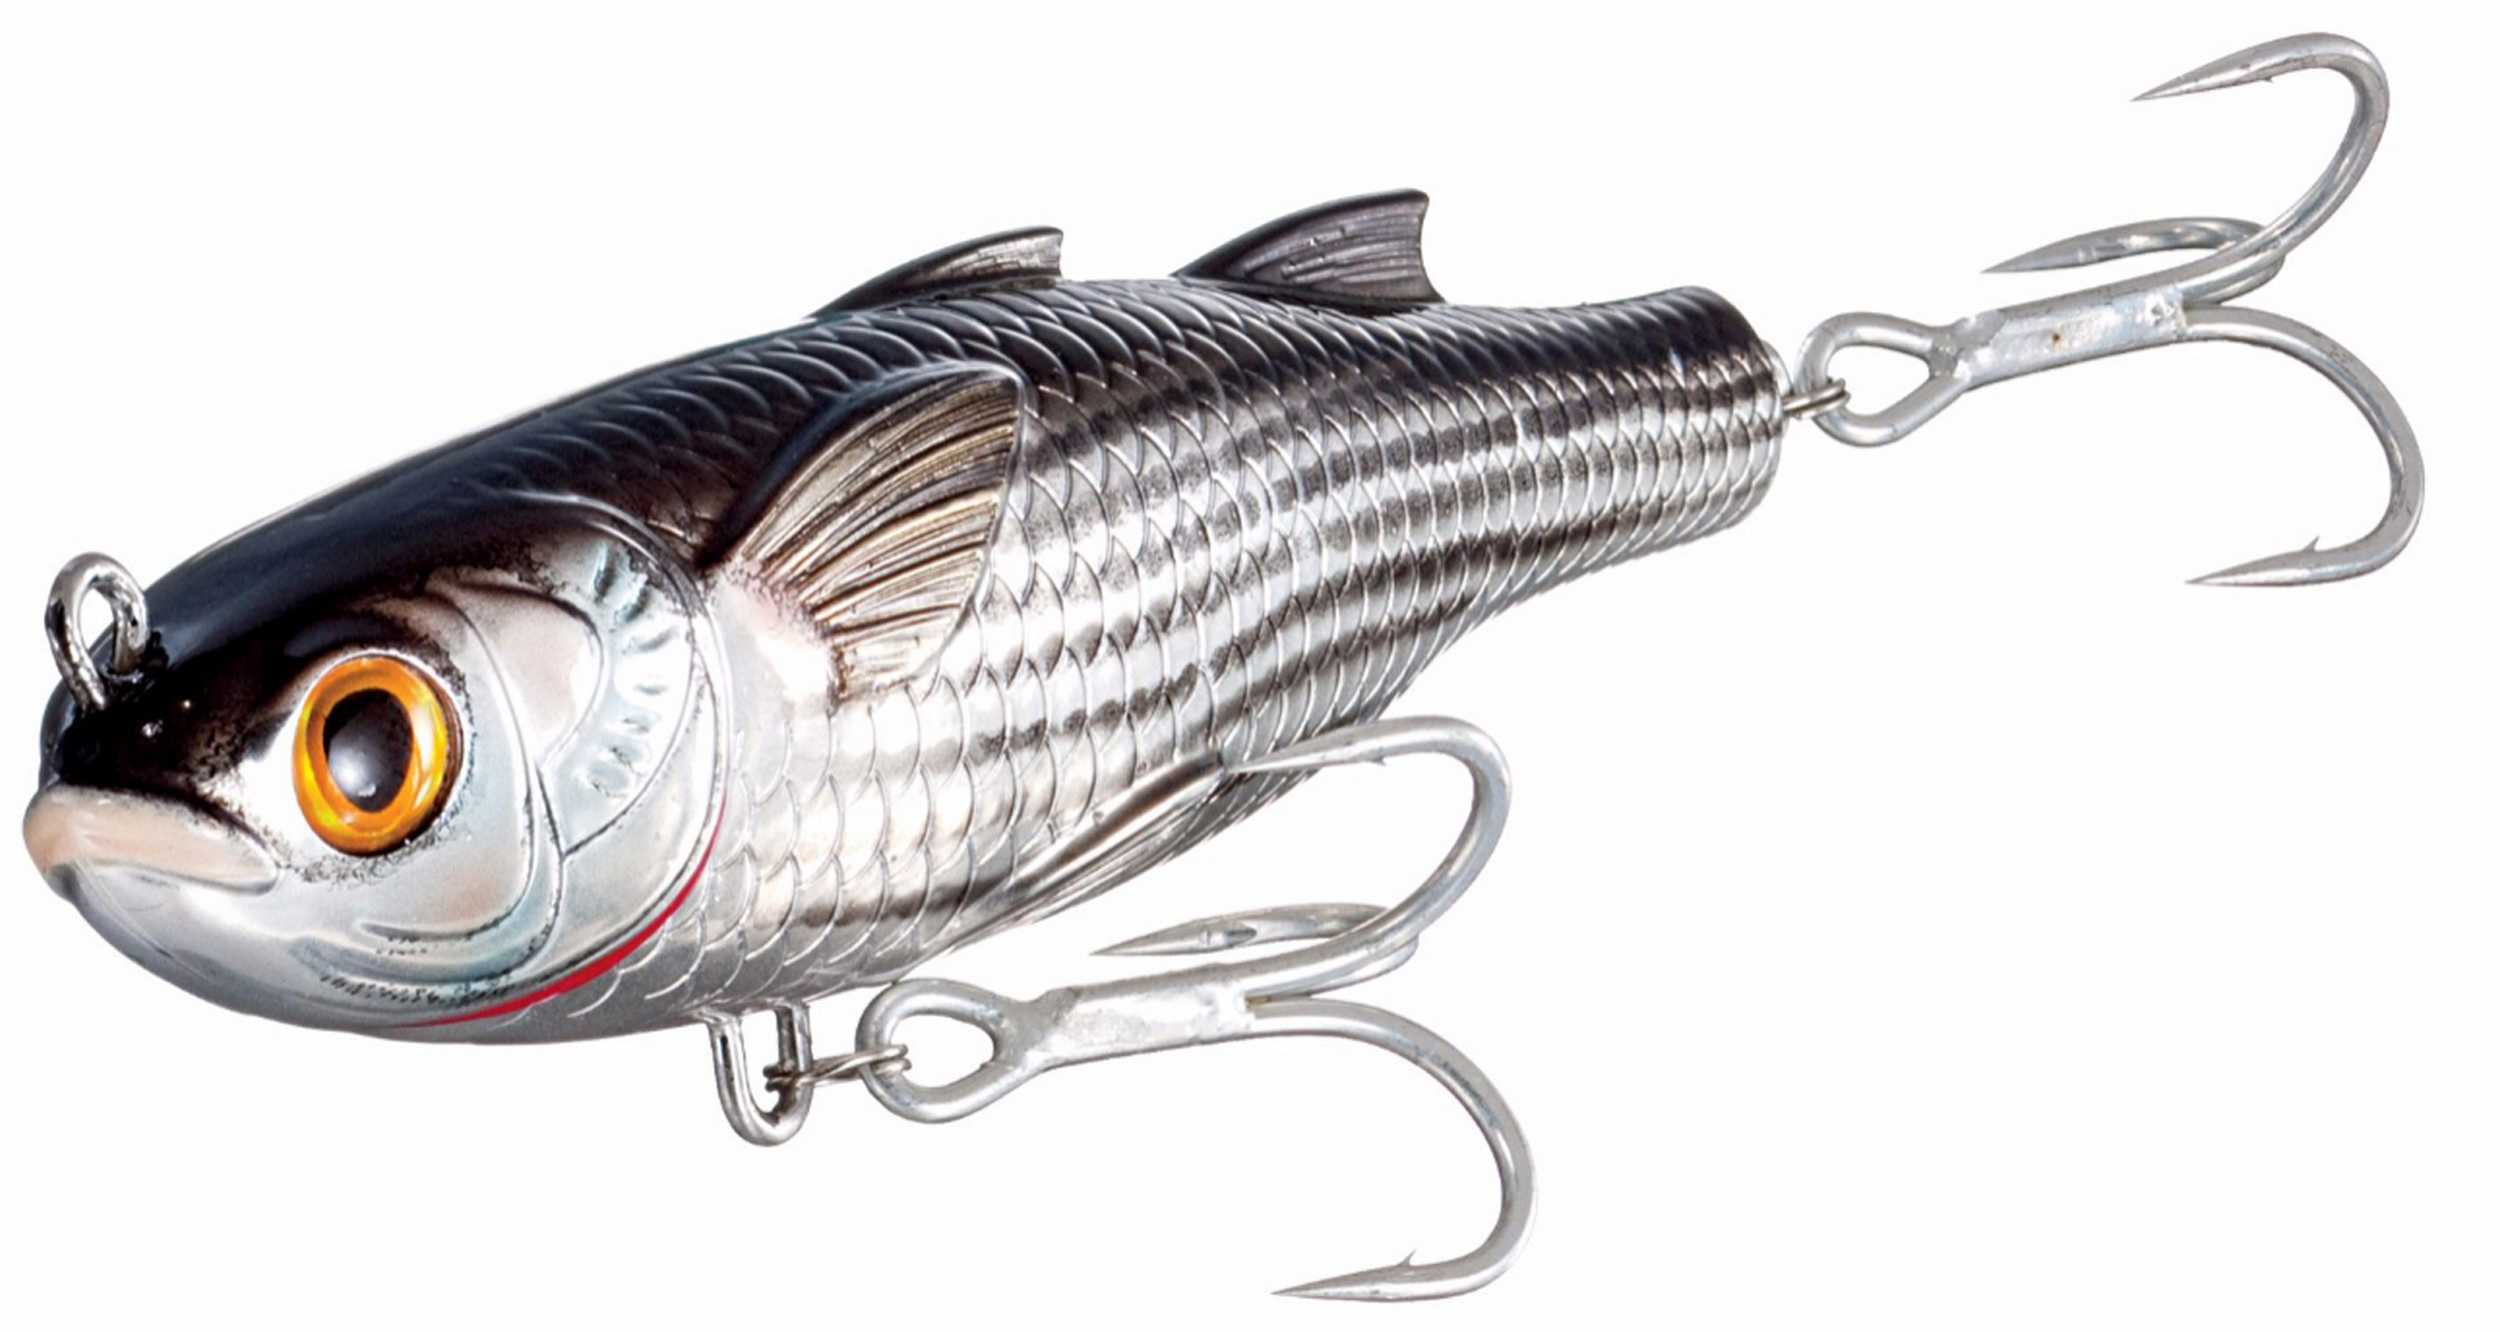 LIVETARGET Lures / Koppers Fishing and Tackle Corp Usa Mullet Twitchbait 3 1/2in Silver/Black MUT90FT932